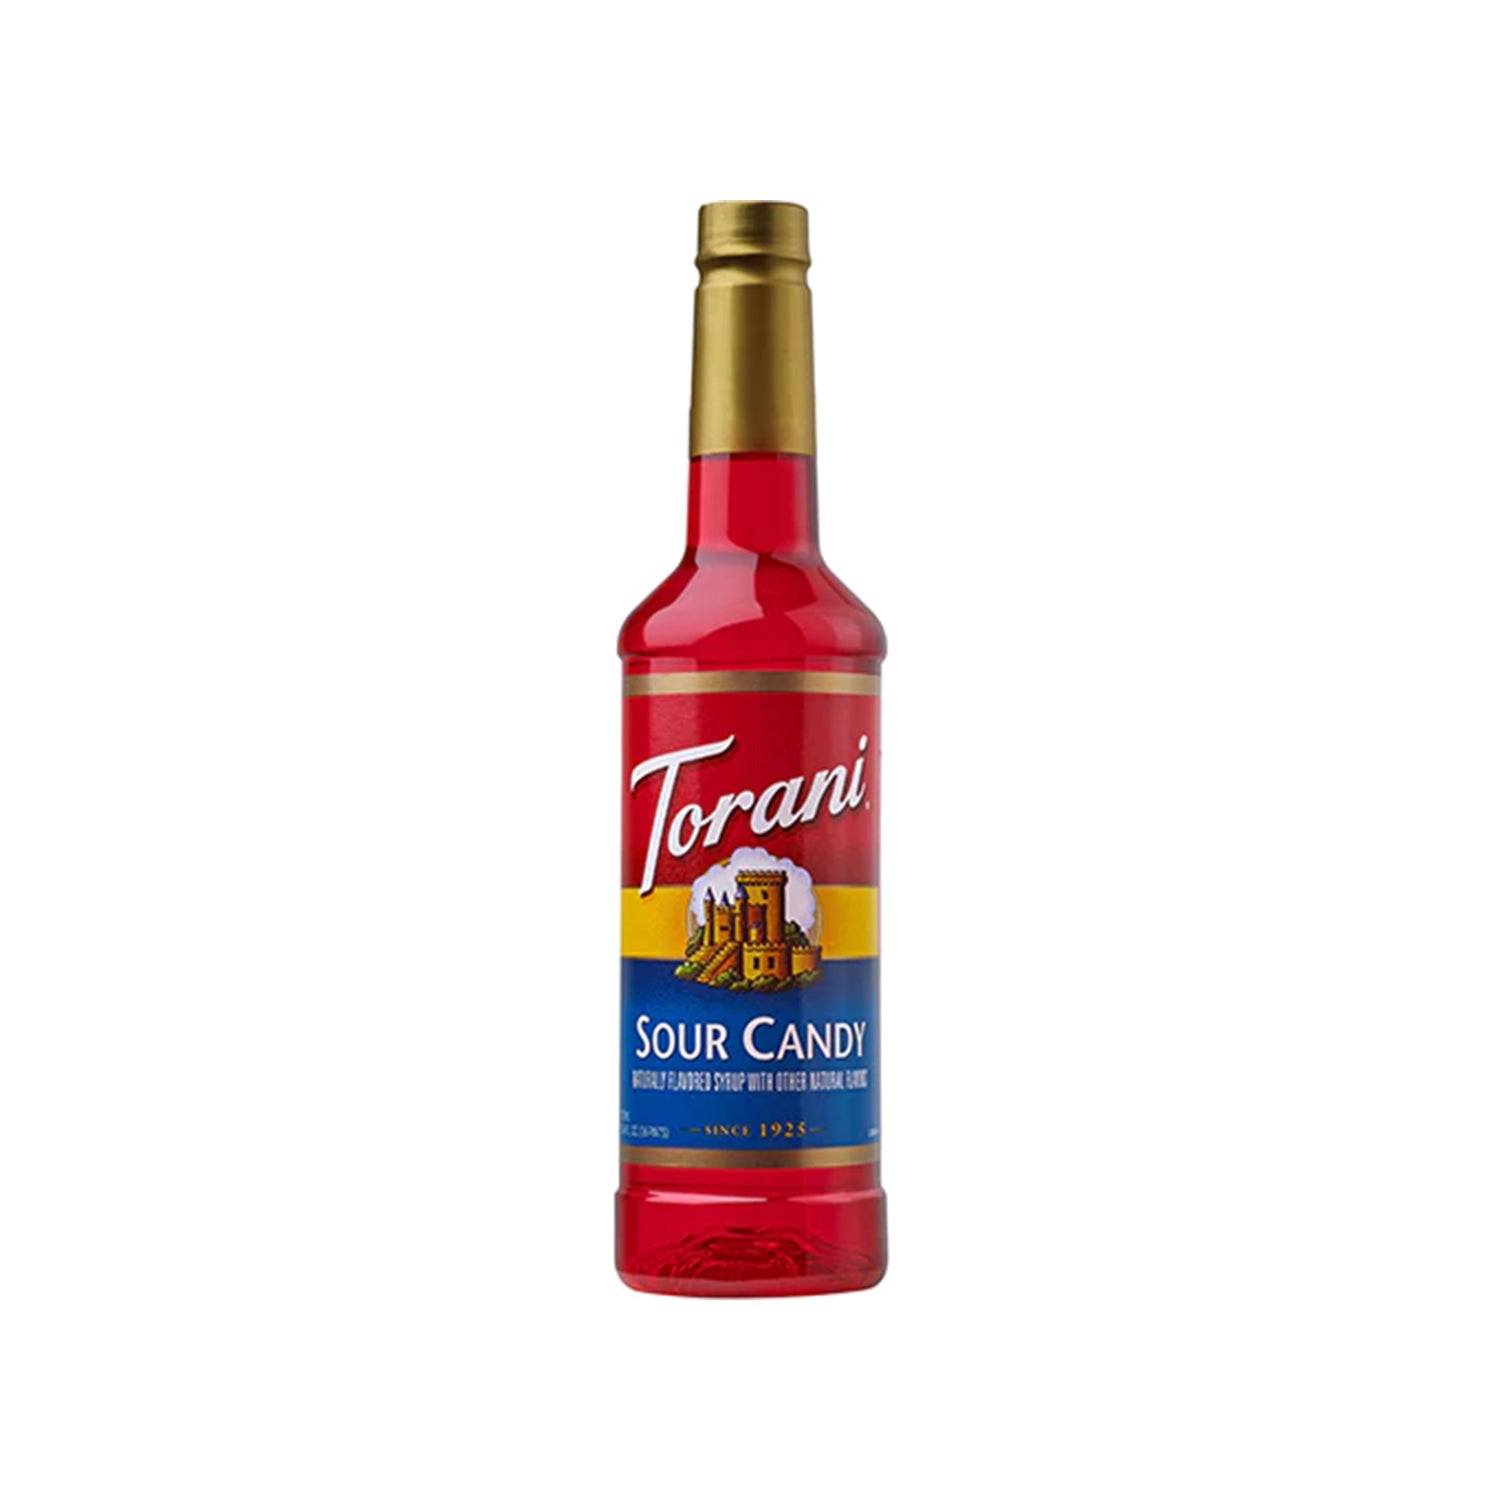 Torani Sour Candy Syrup in 750mL clear bottle